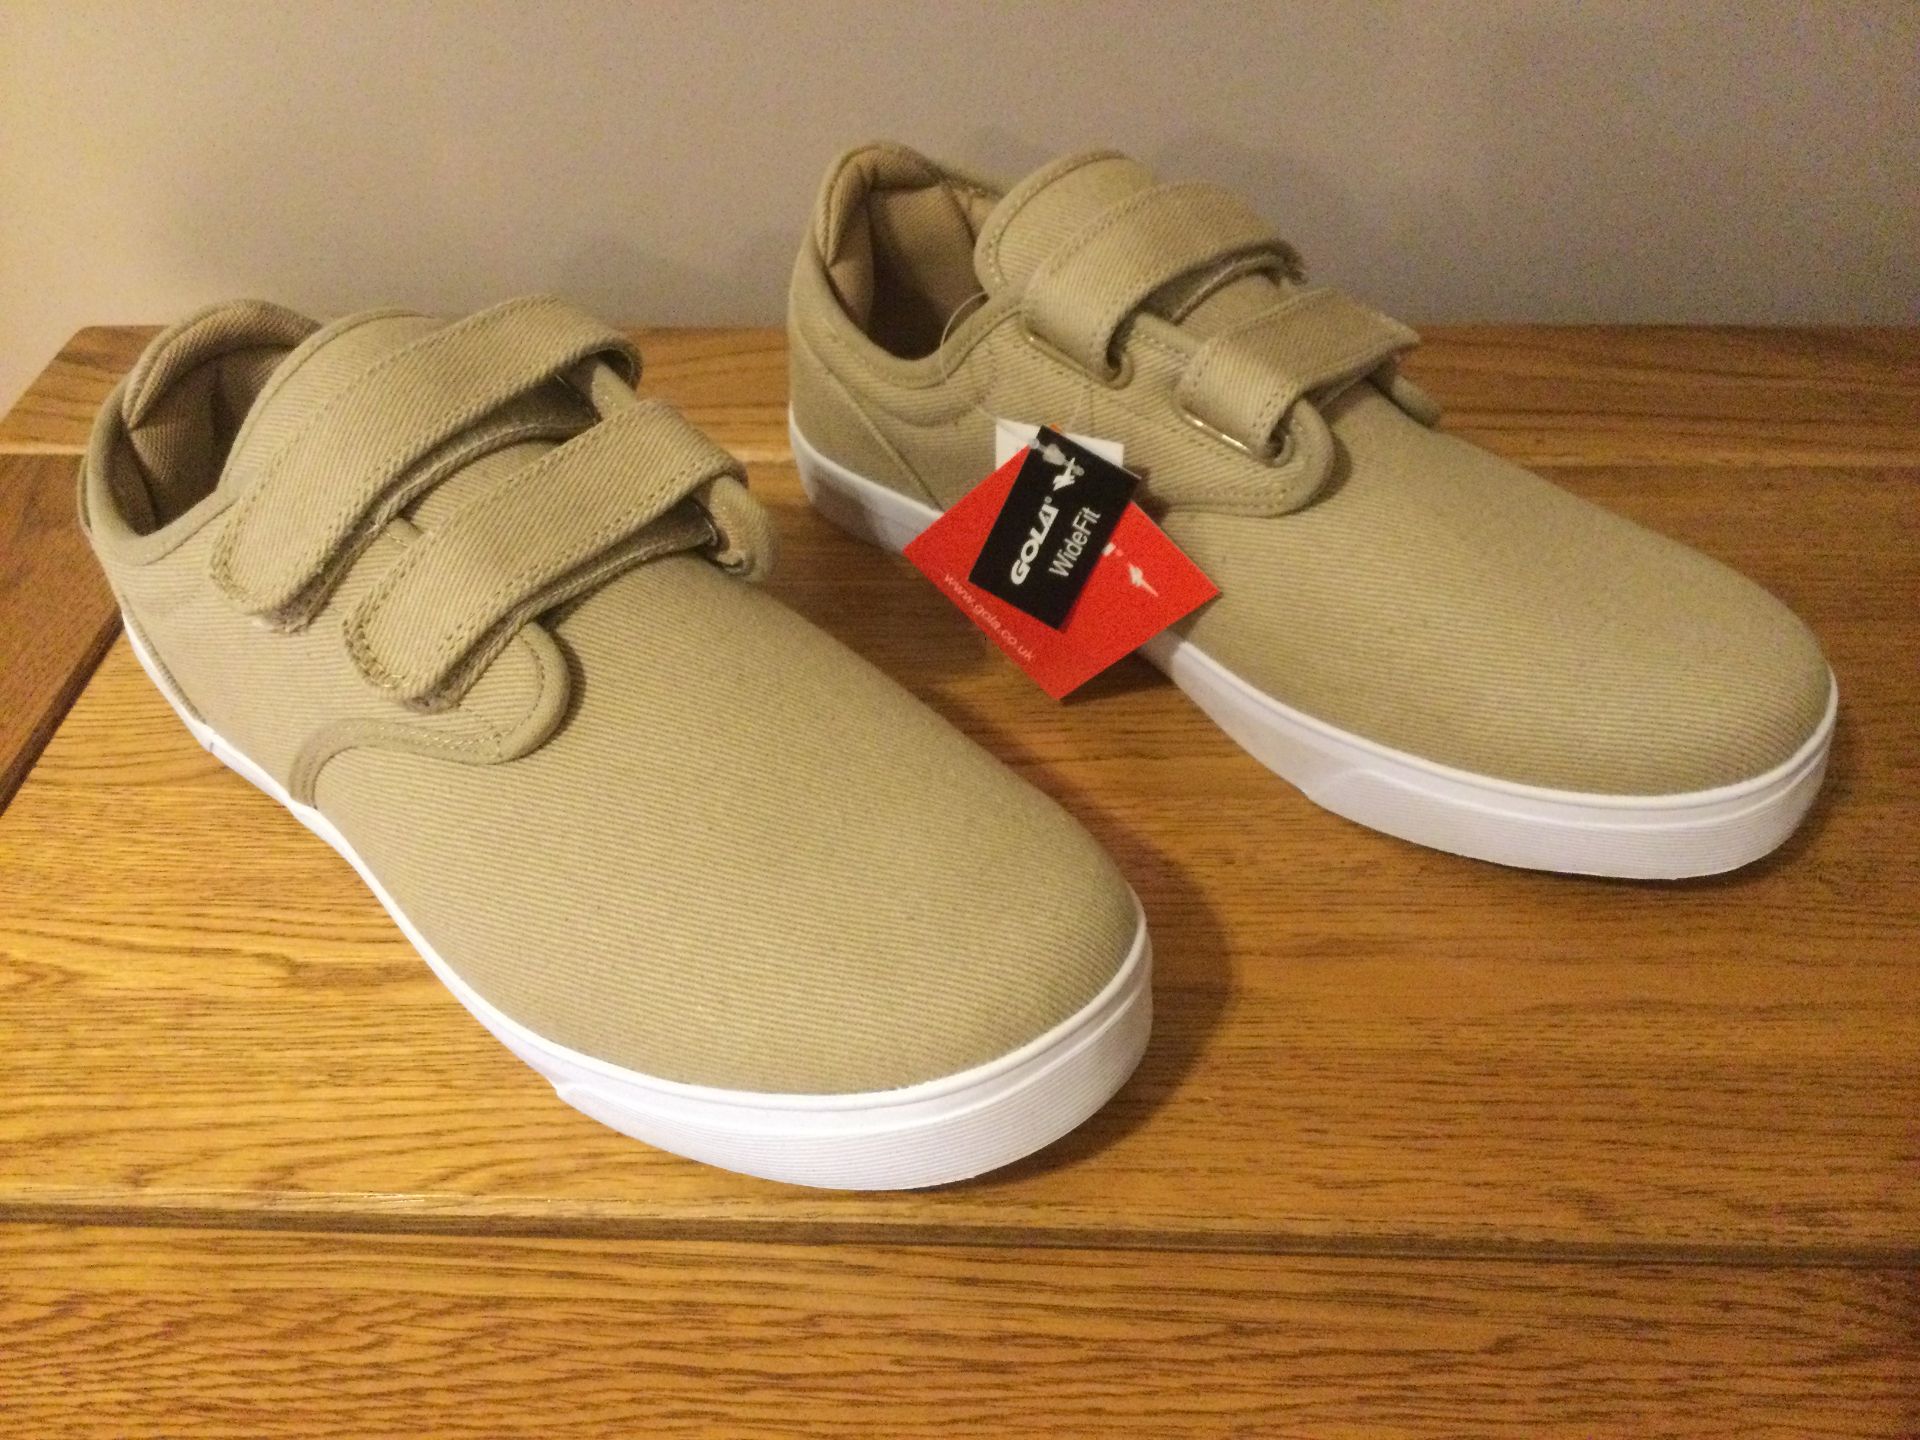 Gola “Panama” QF Men's Wide Fit Trainers, Size 11, Taupe/White - New RRP £36.00 - Image 3 of 5